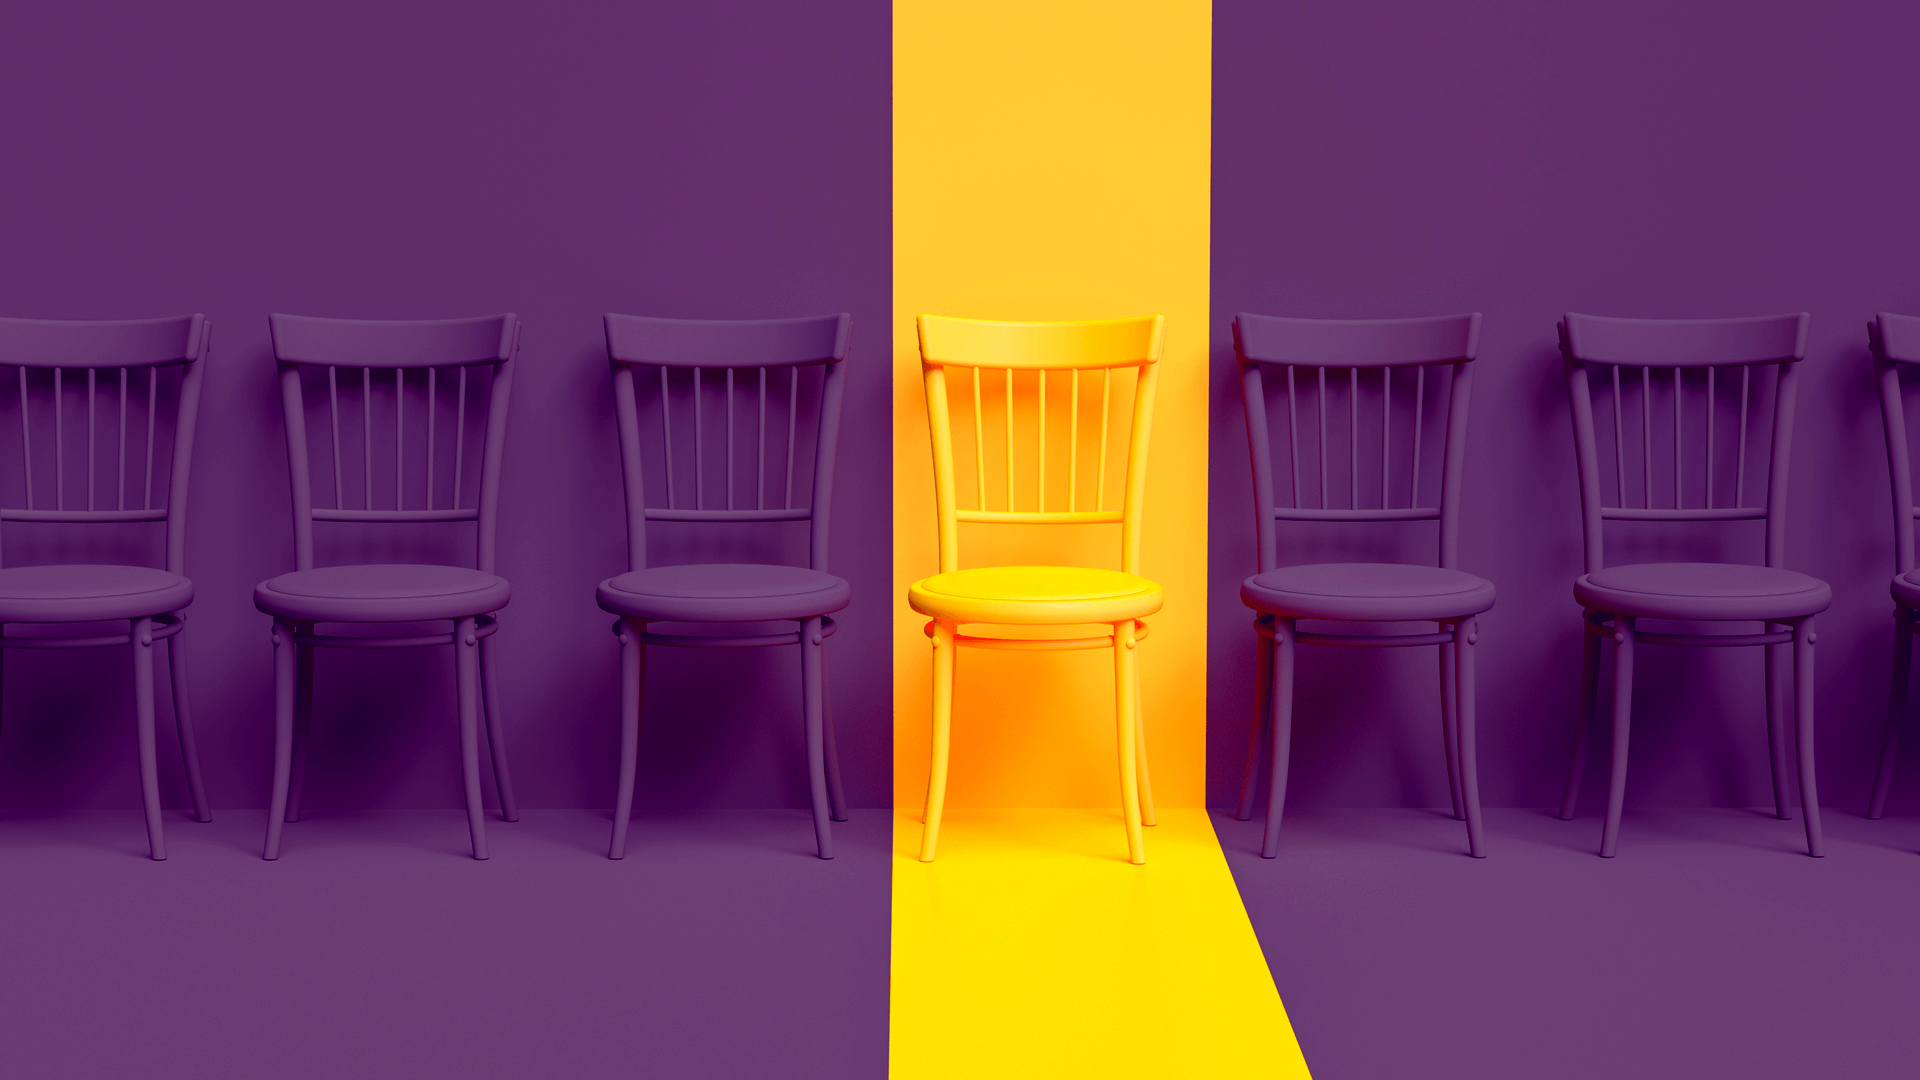 Standing chairs in a row, yellow chair stands out among the likes. Business hiring and recruiting concept. 3d illustration.